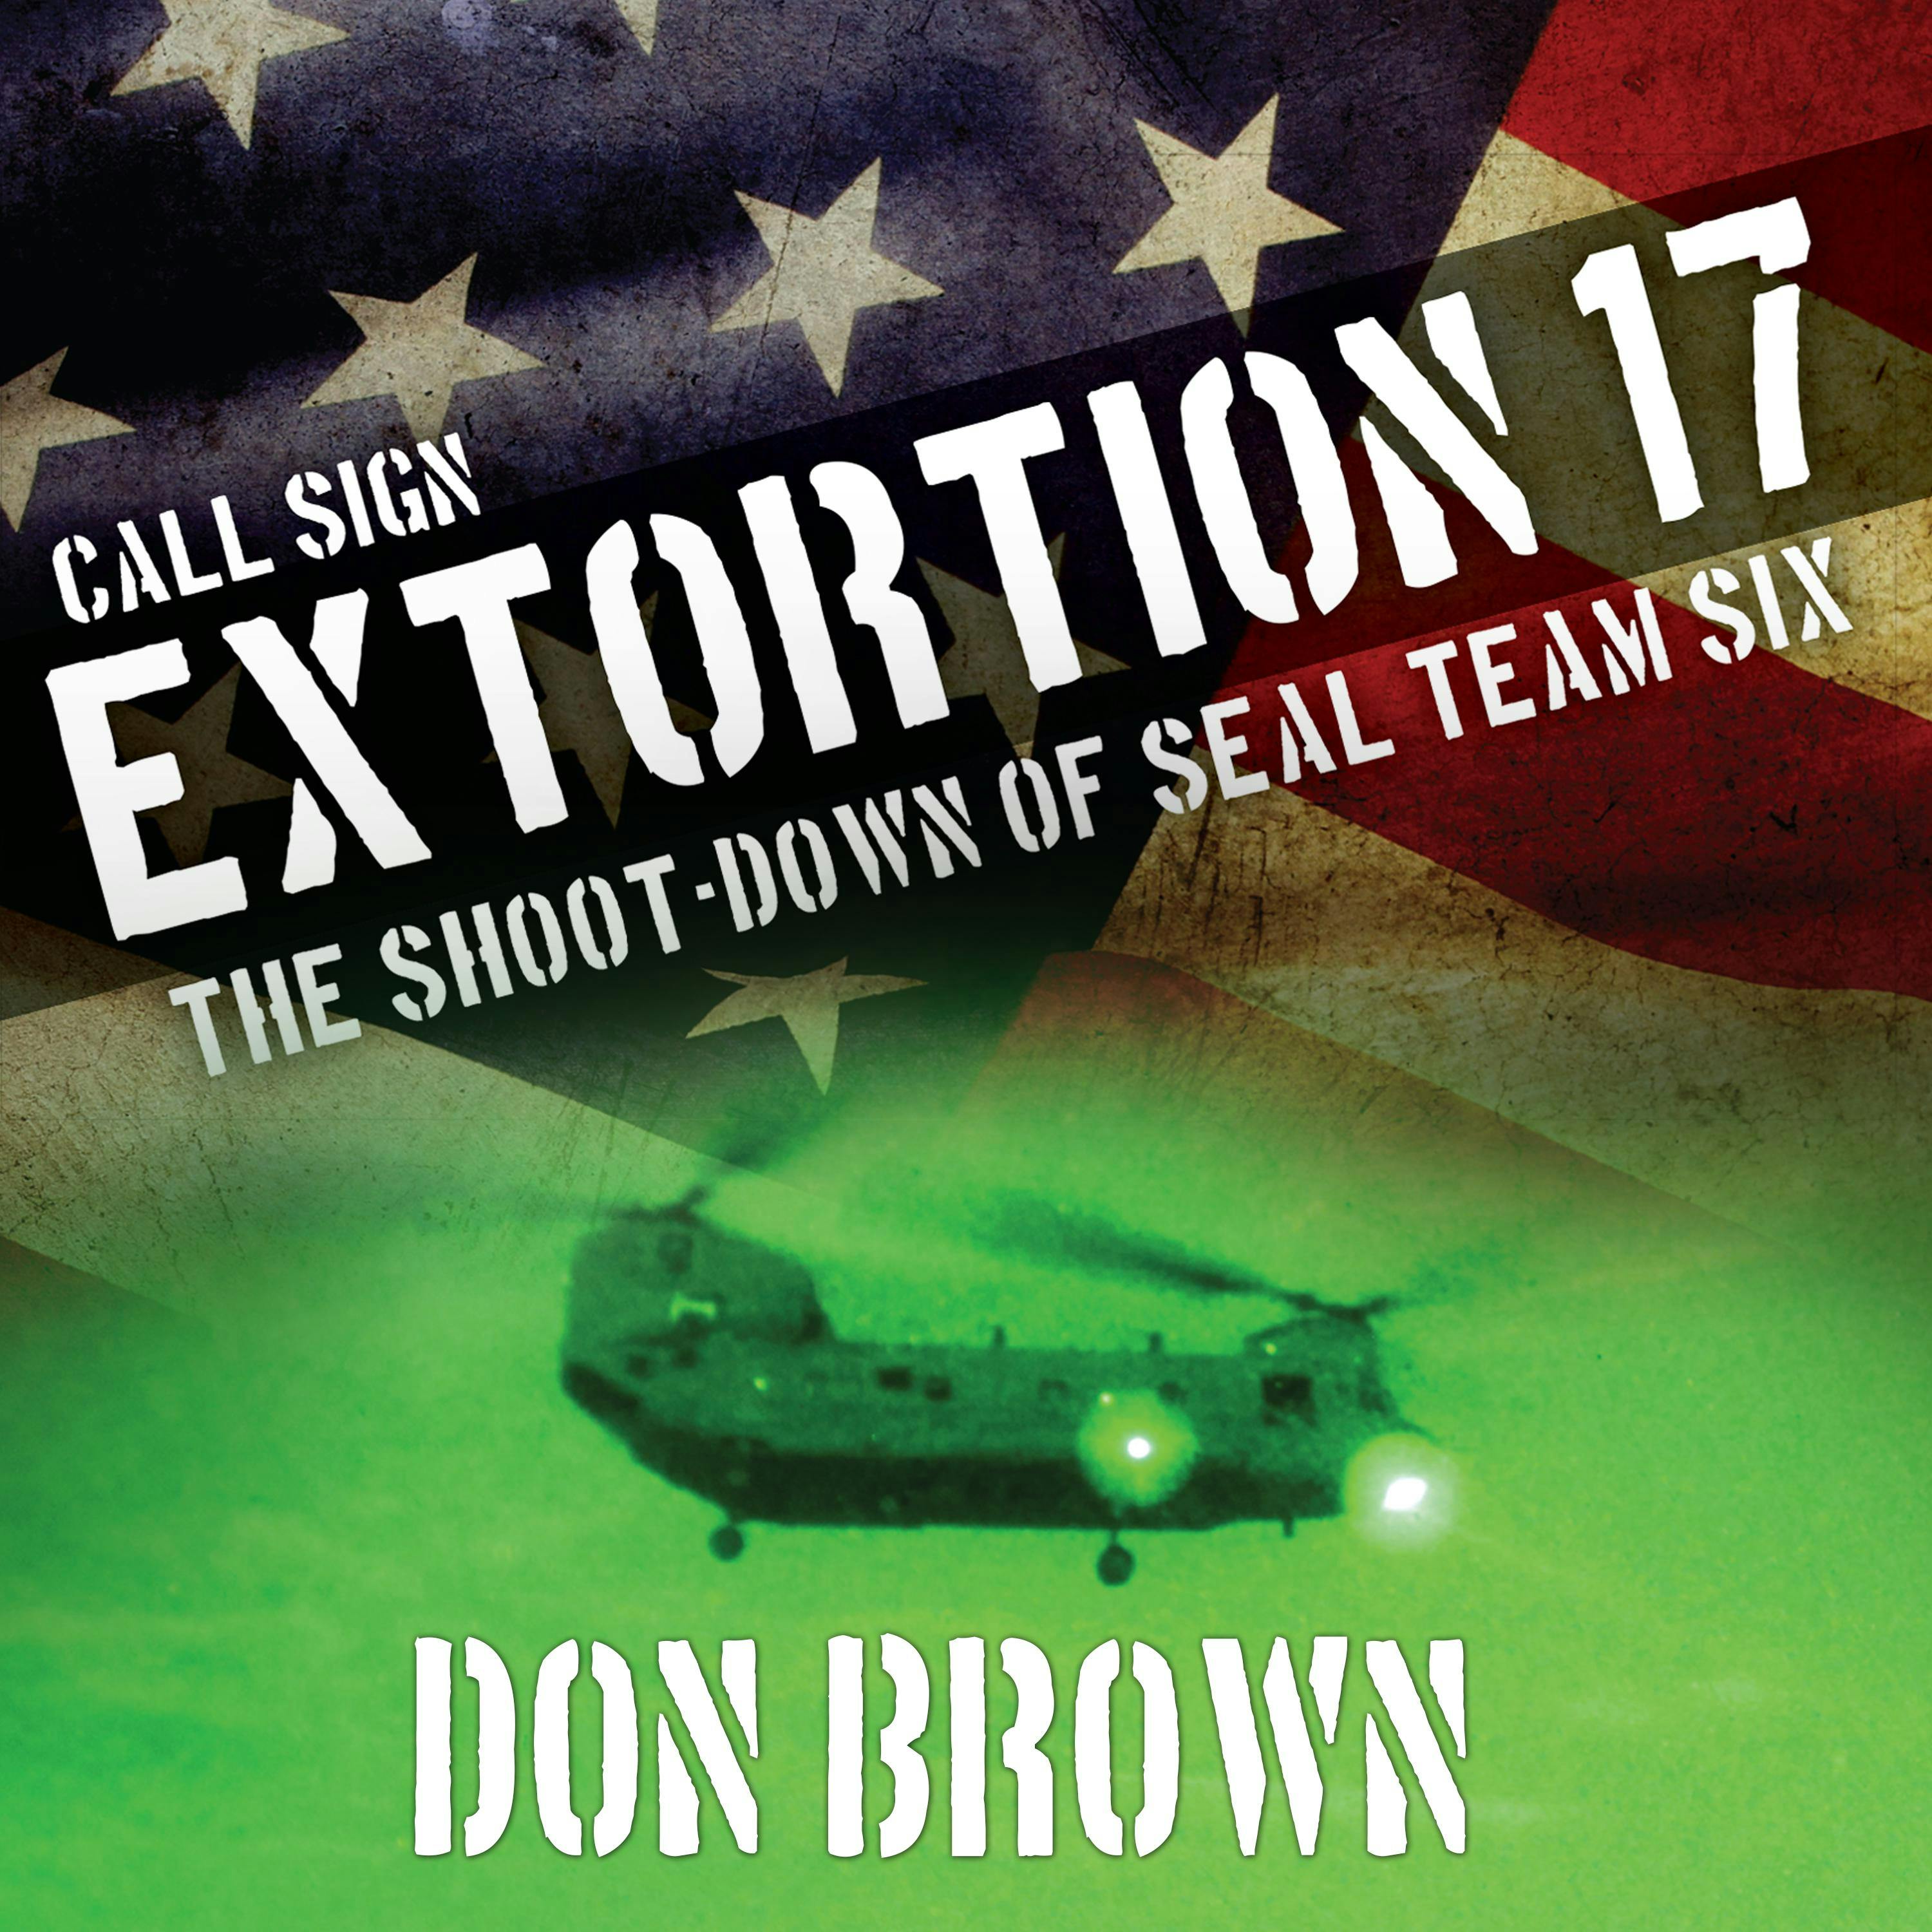 Call Sign Extortion 17: The Shoot-down of Seal Team Six - undefined